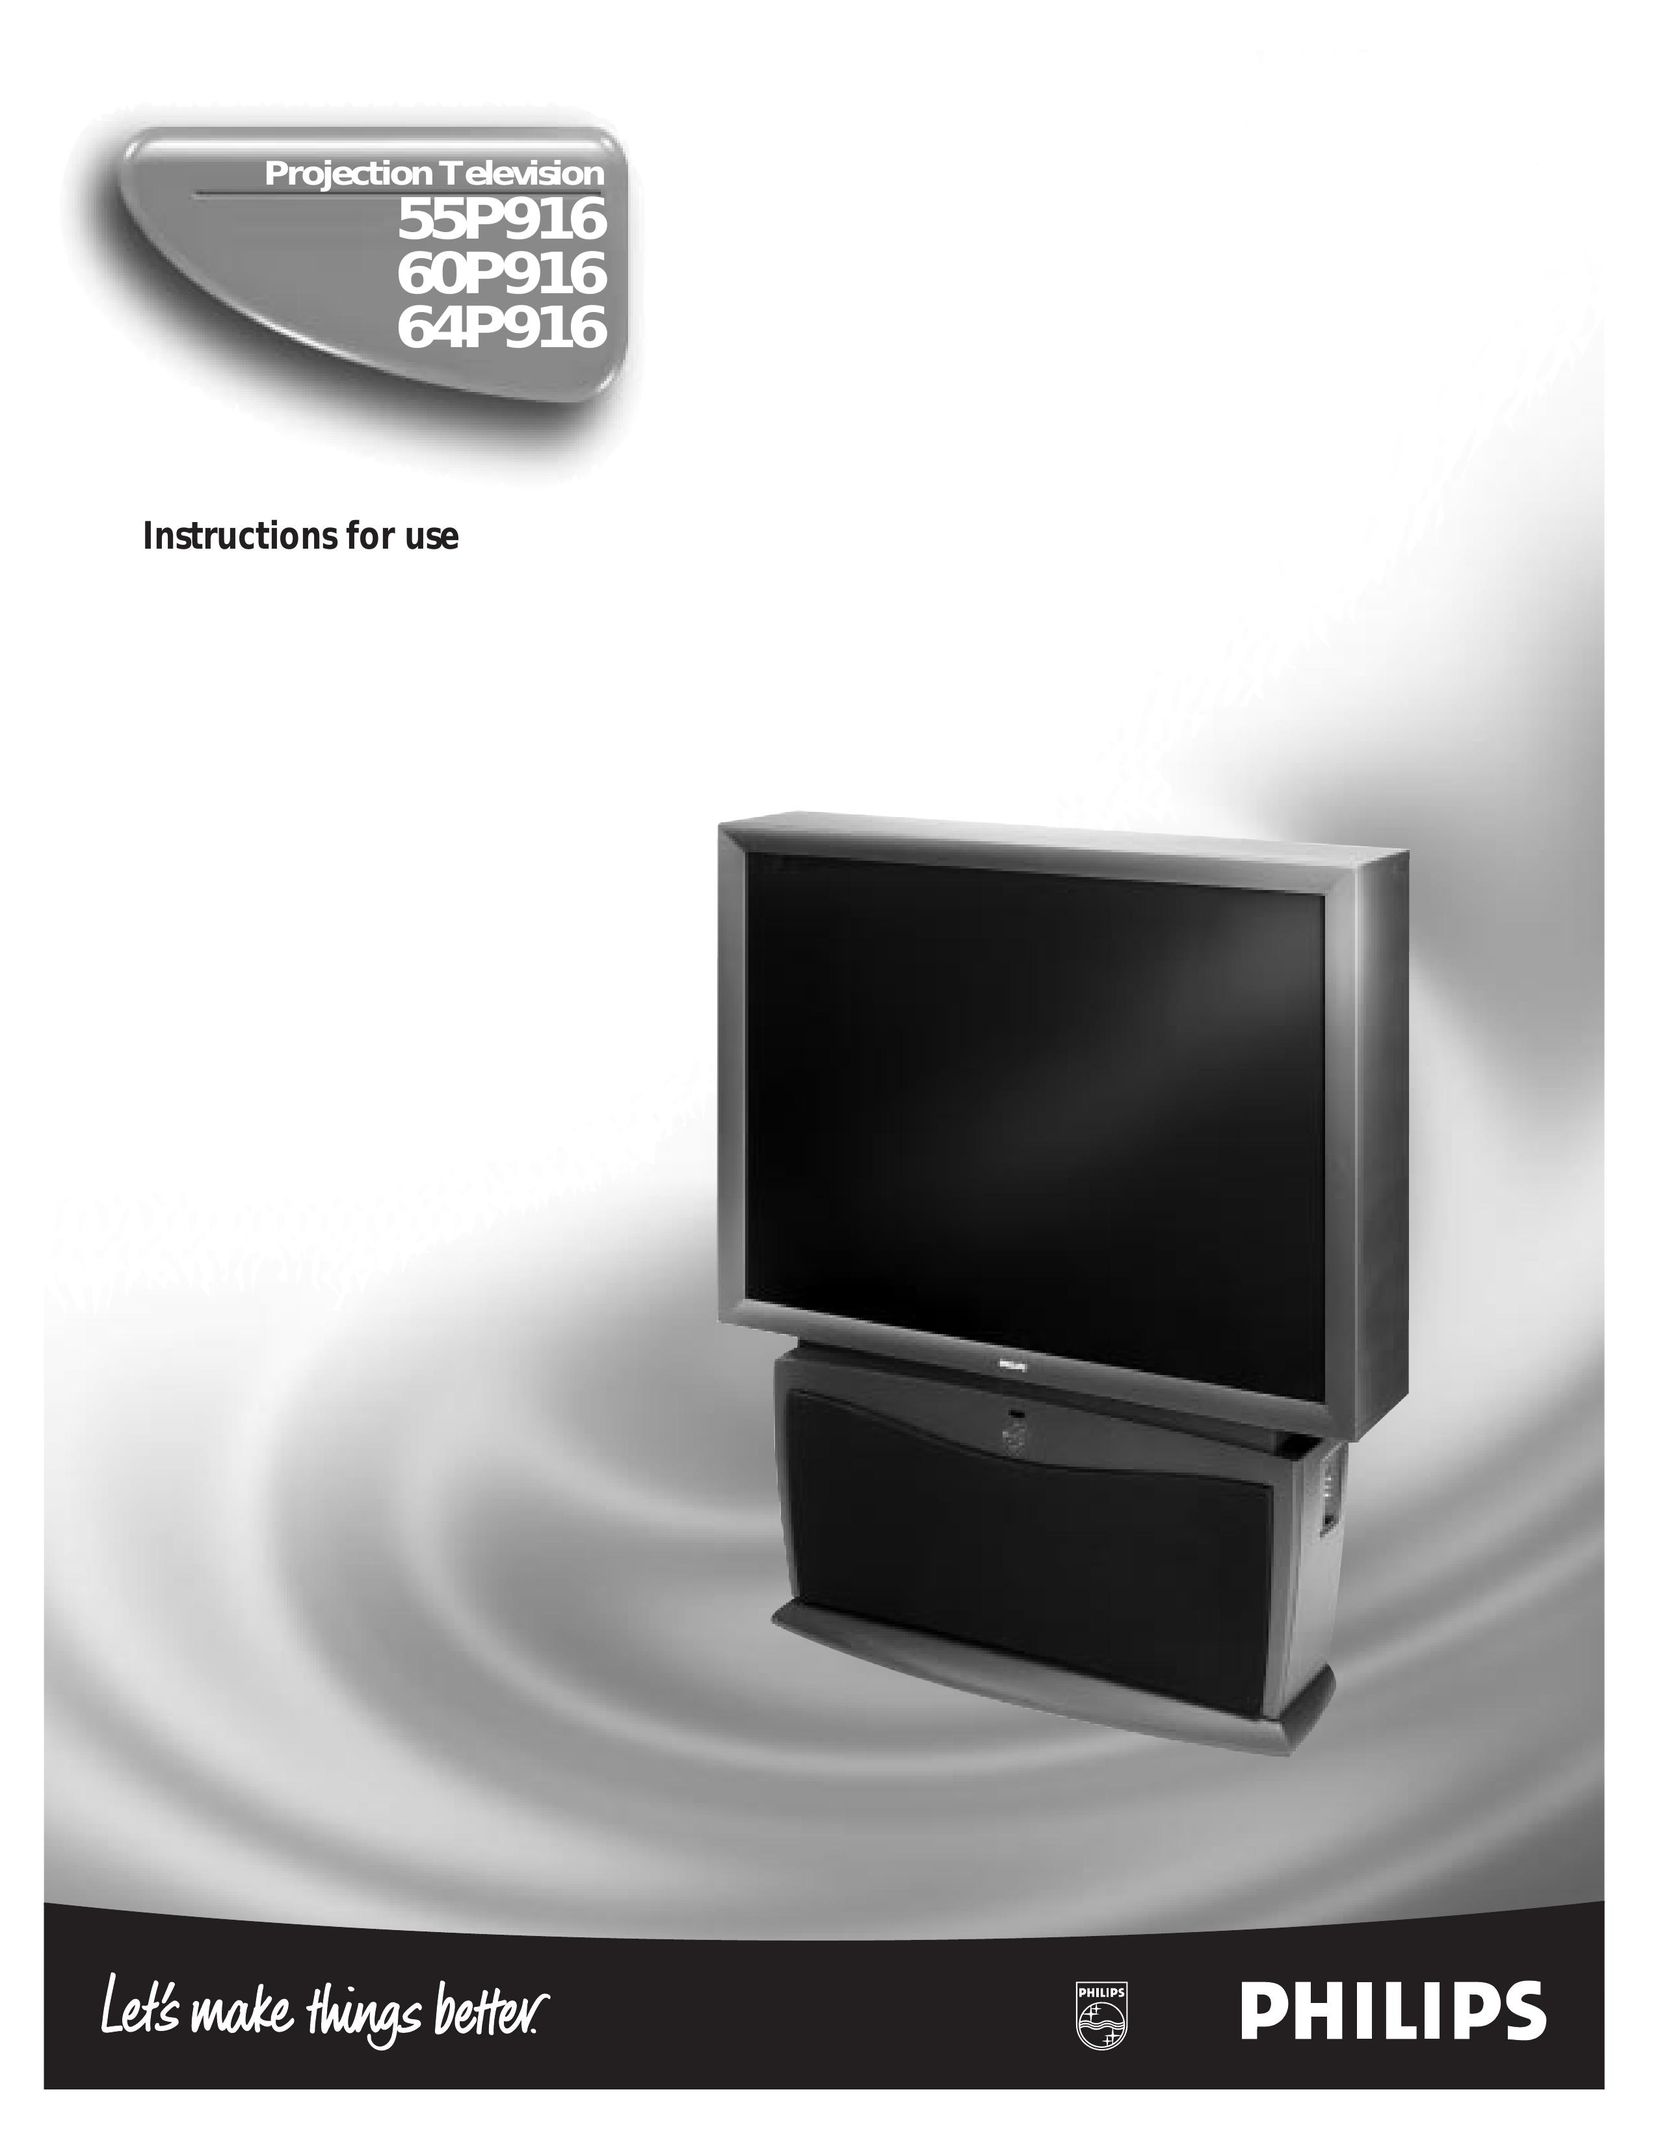 Magnavox 64P916 Projection Television User Manual